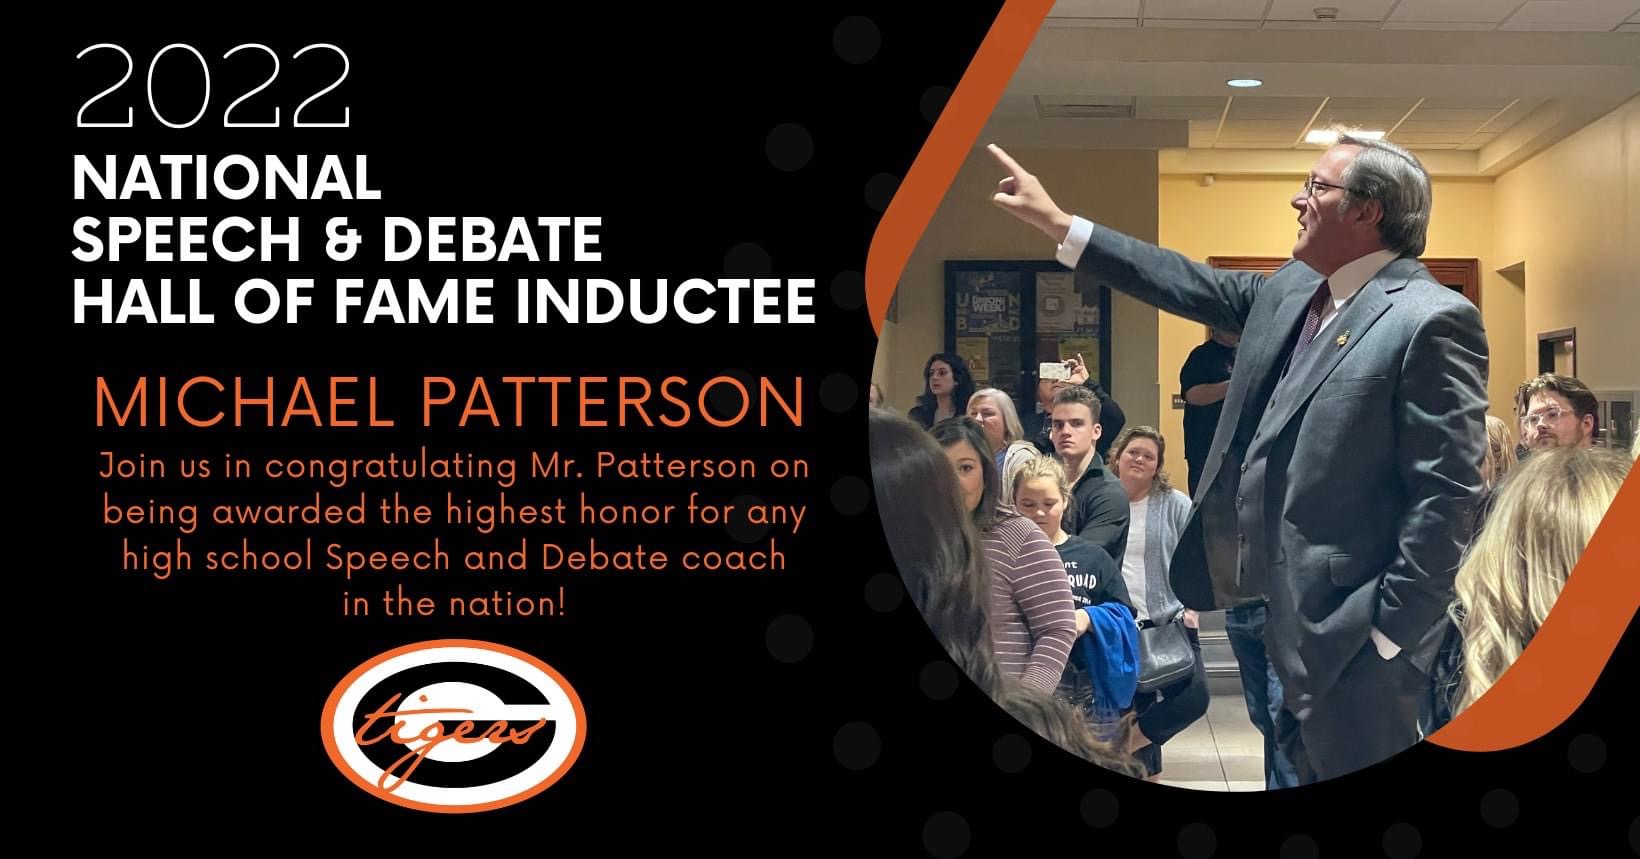 Speech & Debate Coach from Guymon to be Inducted into National Hall of Fame